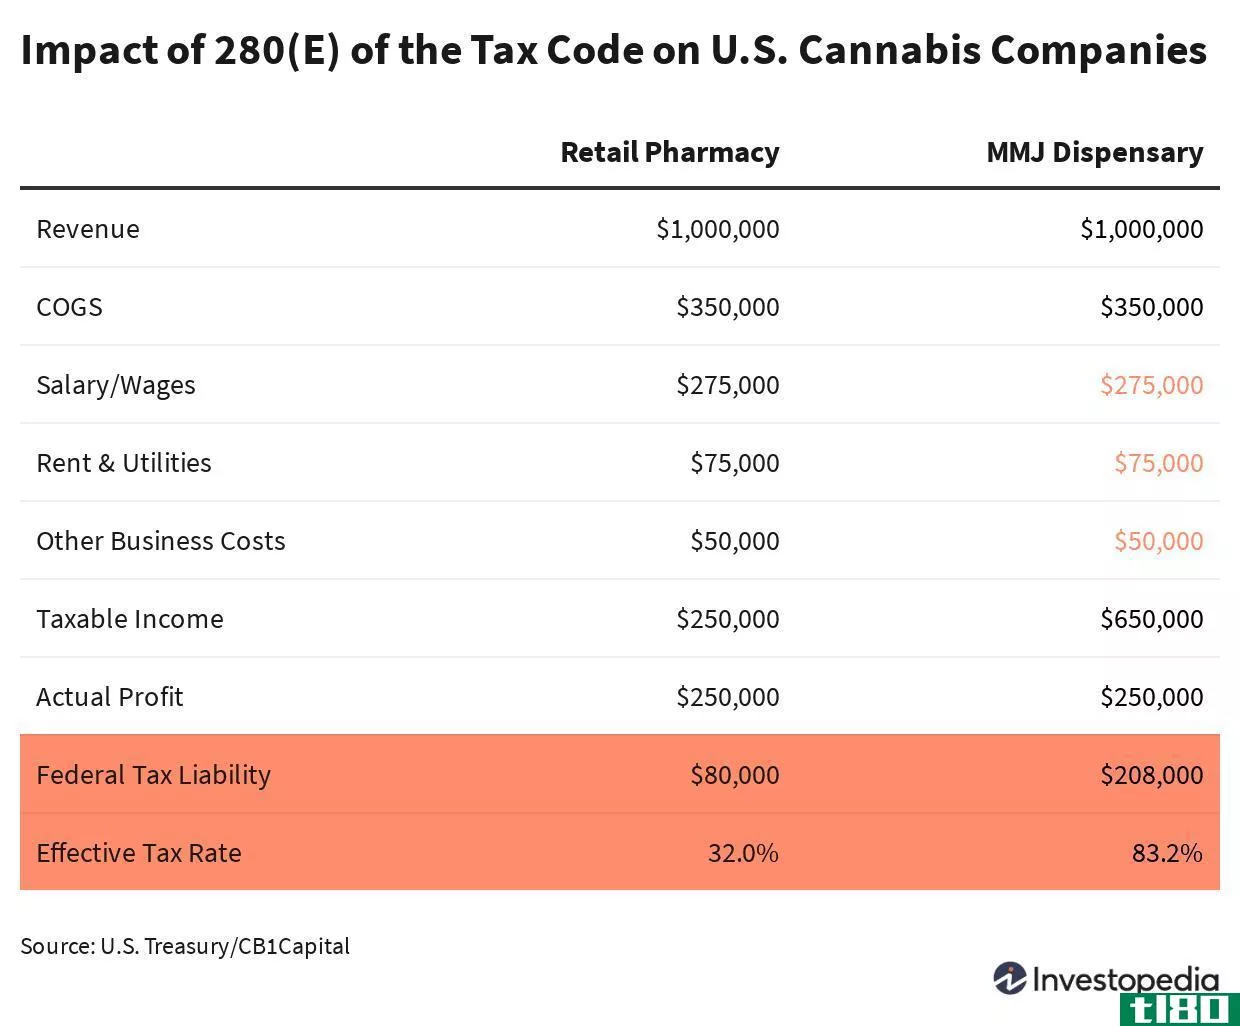 Cannabis and the Tax Code